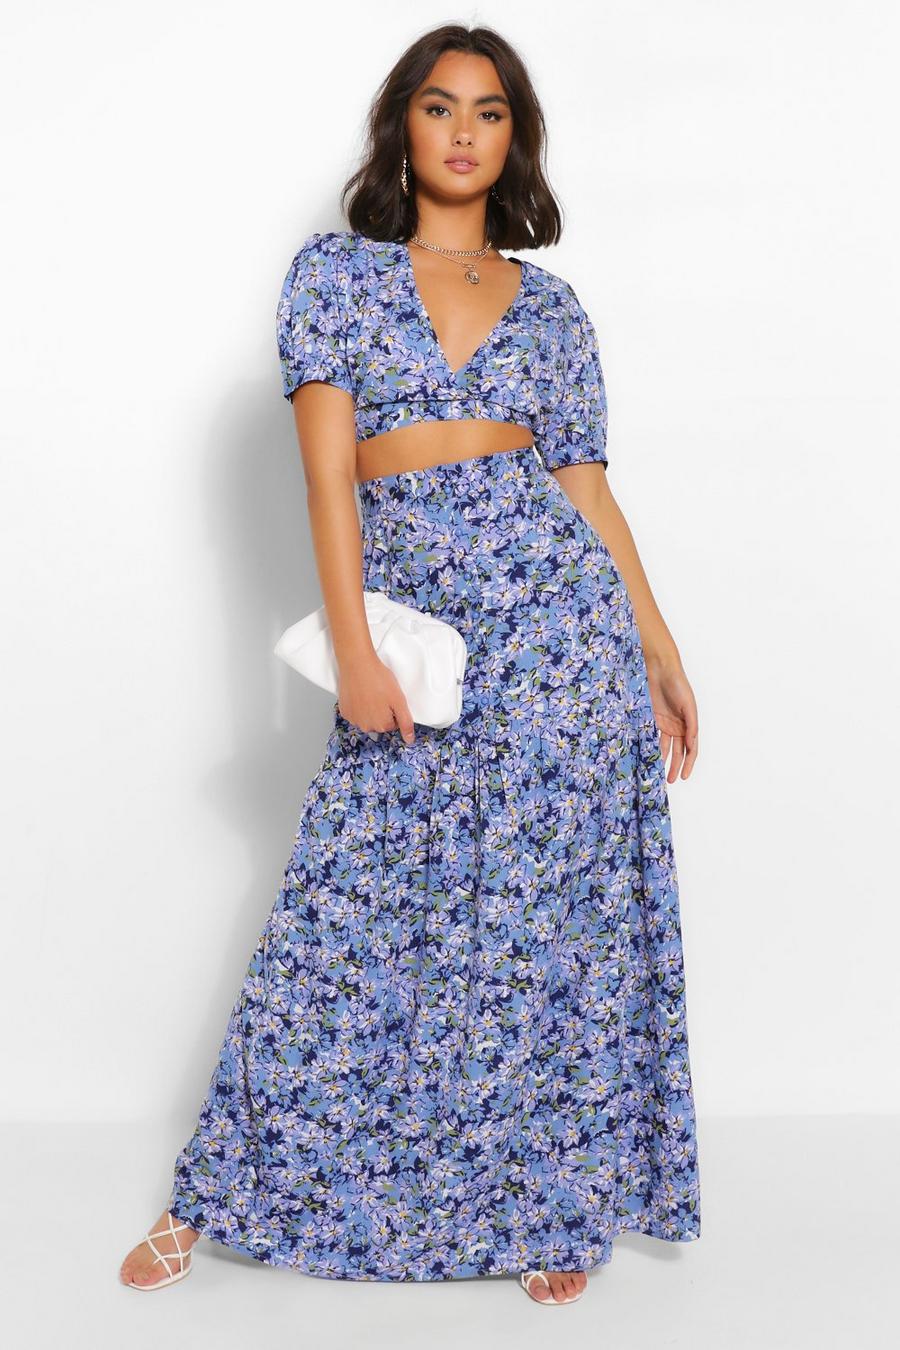 Conclusion: Embracing the Crop Top and Long Skirt Set